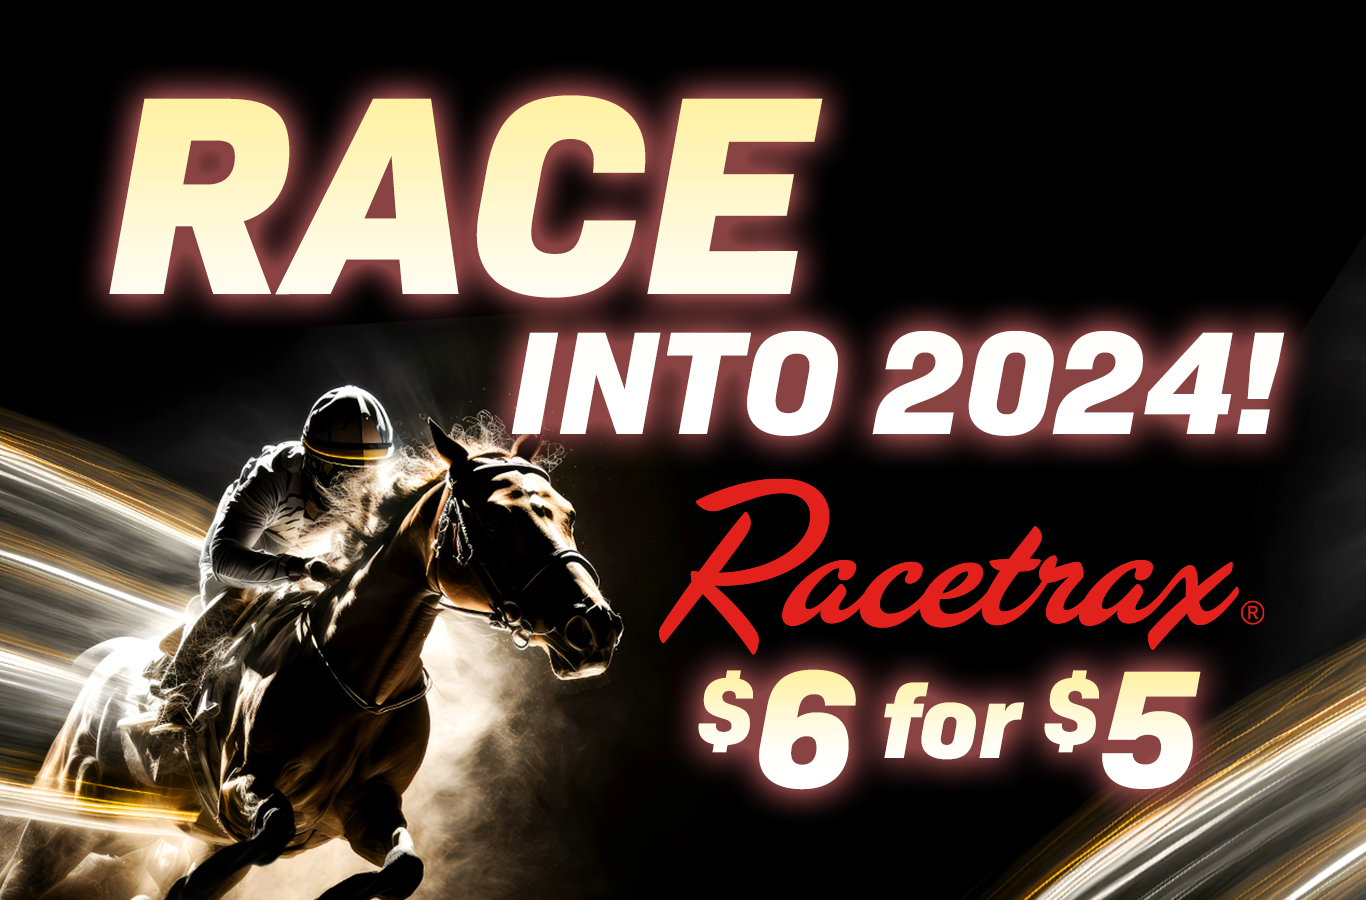 Receive a $1 discount on every $6 Racetrax® purchase through January 1st!